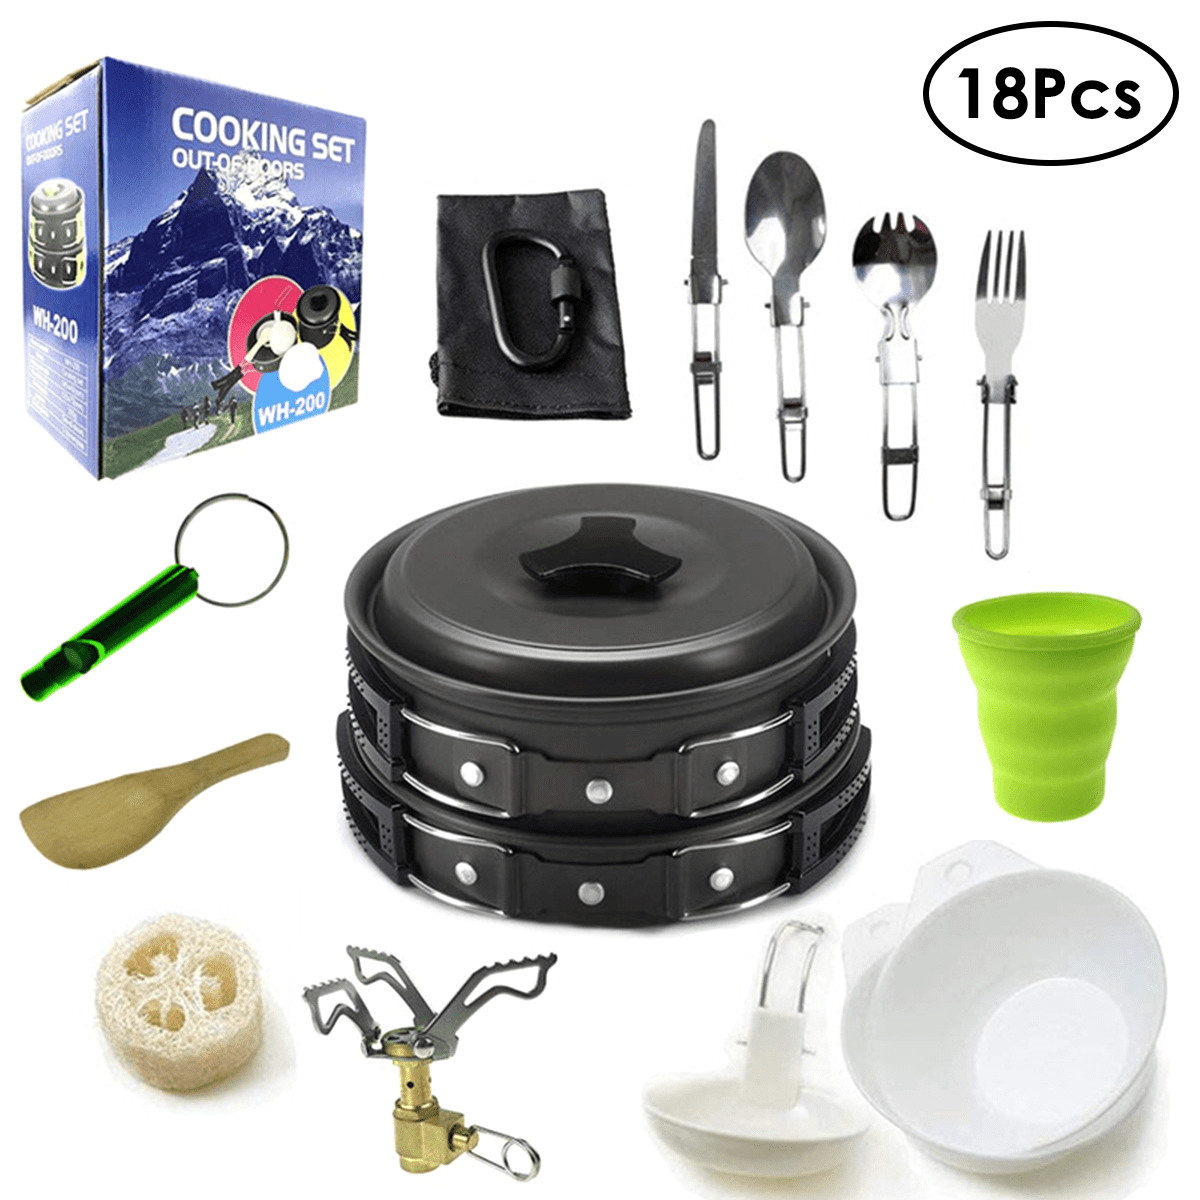 Bisgear Camping Cookware Pots and Pans Set Mess Kit Backpacking Gear Cooking Equipment 14 Piece Cookset Outdoors Bug Out Bag Hiking Bowl Fork Fire Starters Carabiner for 2 Person